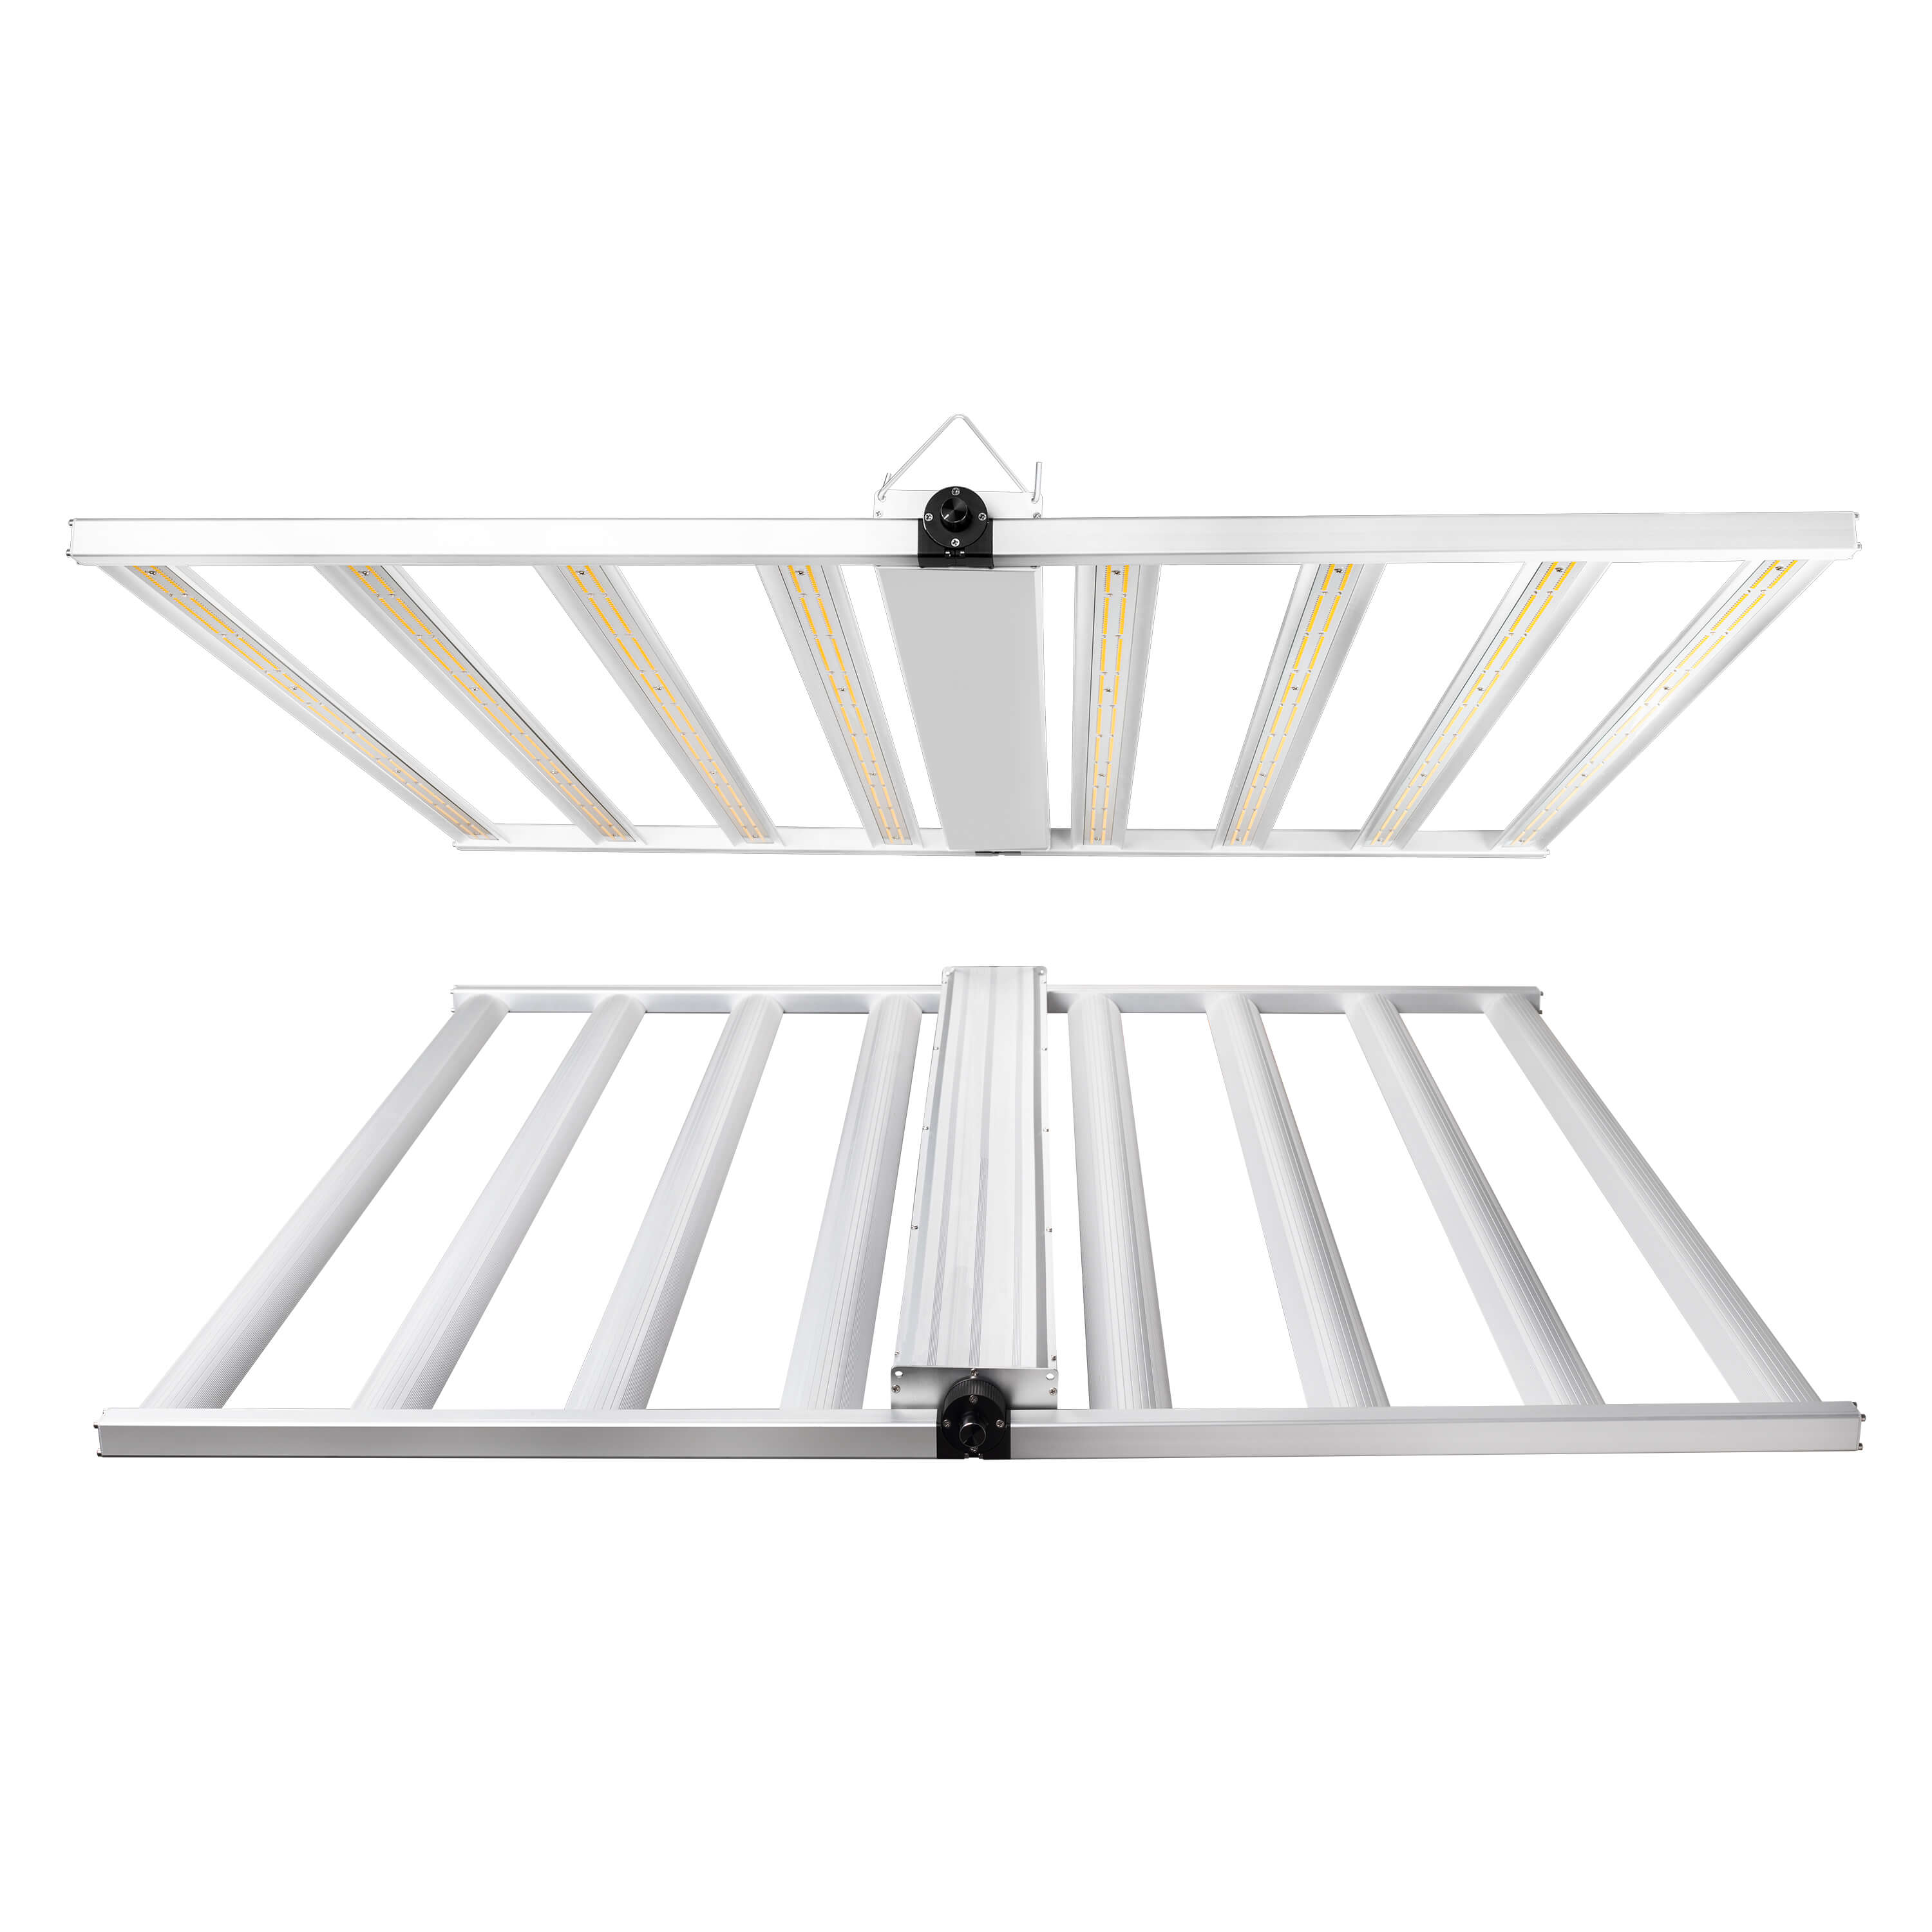 CT-800 Full Spectrum LED Grow Light -800 Watts, 5'x5'/6'x6', Dimmable, High Efficacy, Commercial Use | Cultiuana - 0